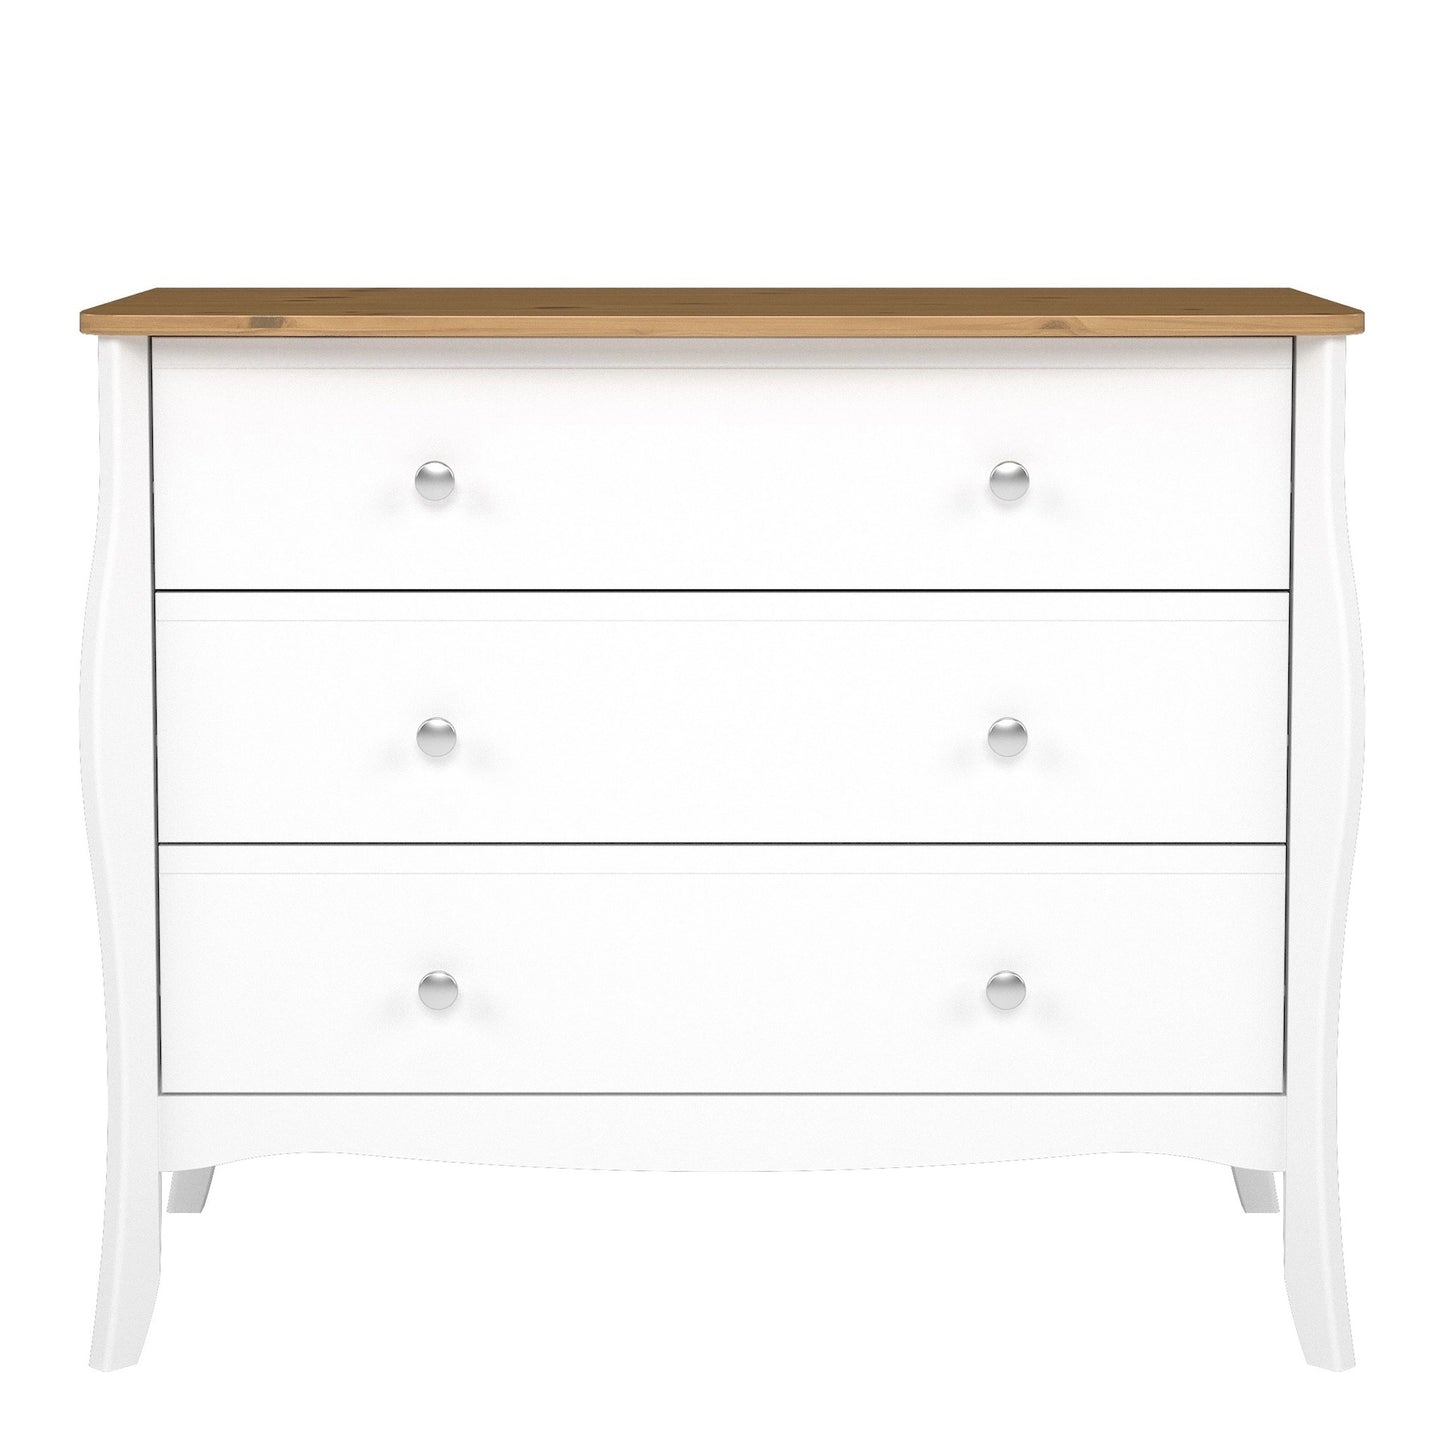 Furniture To Go Baroque 3 Drawer Wide Chest Pure White Iced Coffee Lacquer